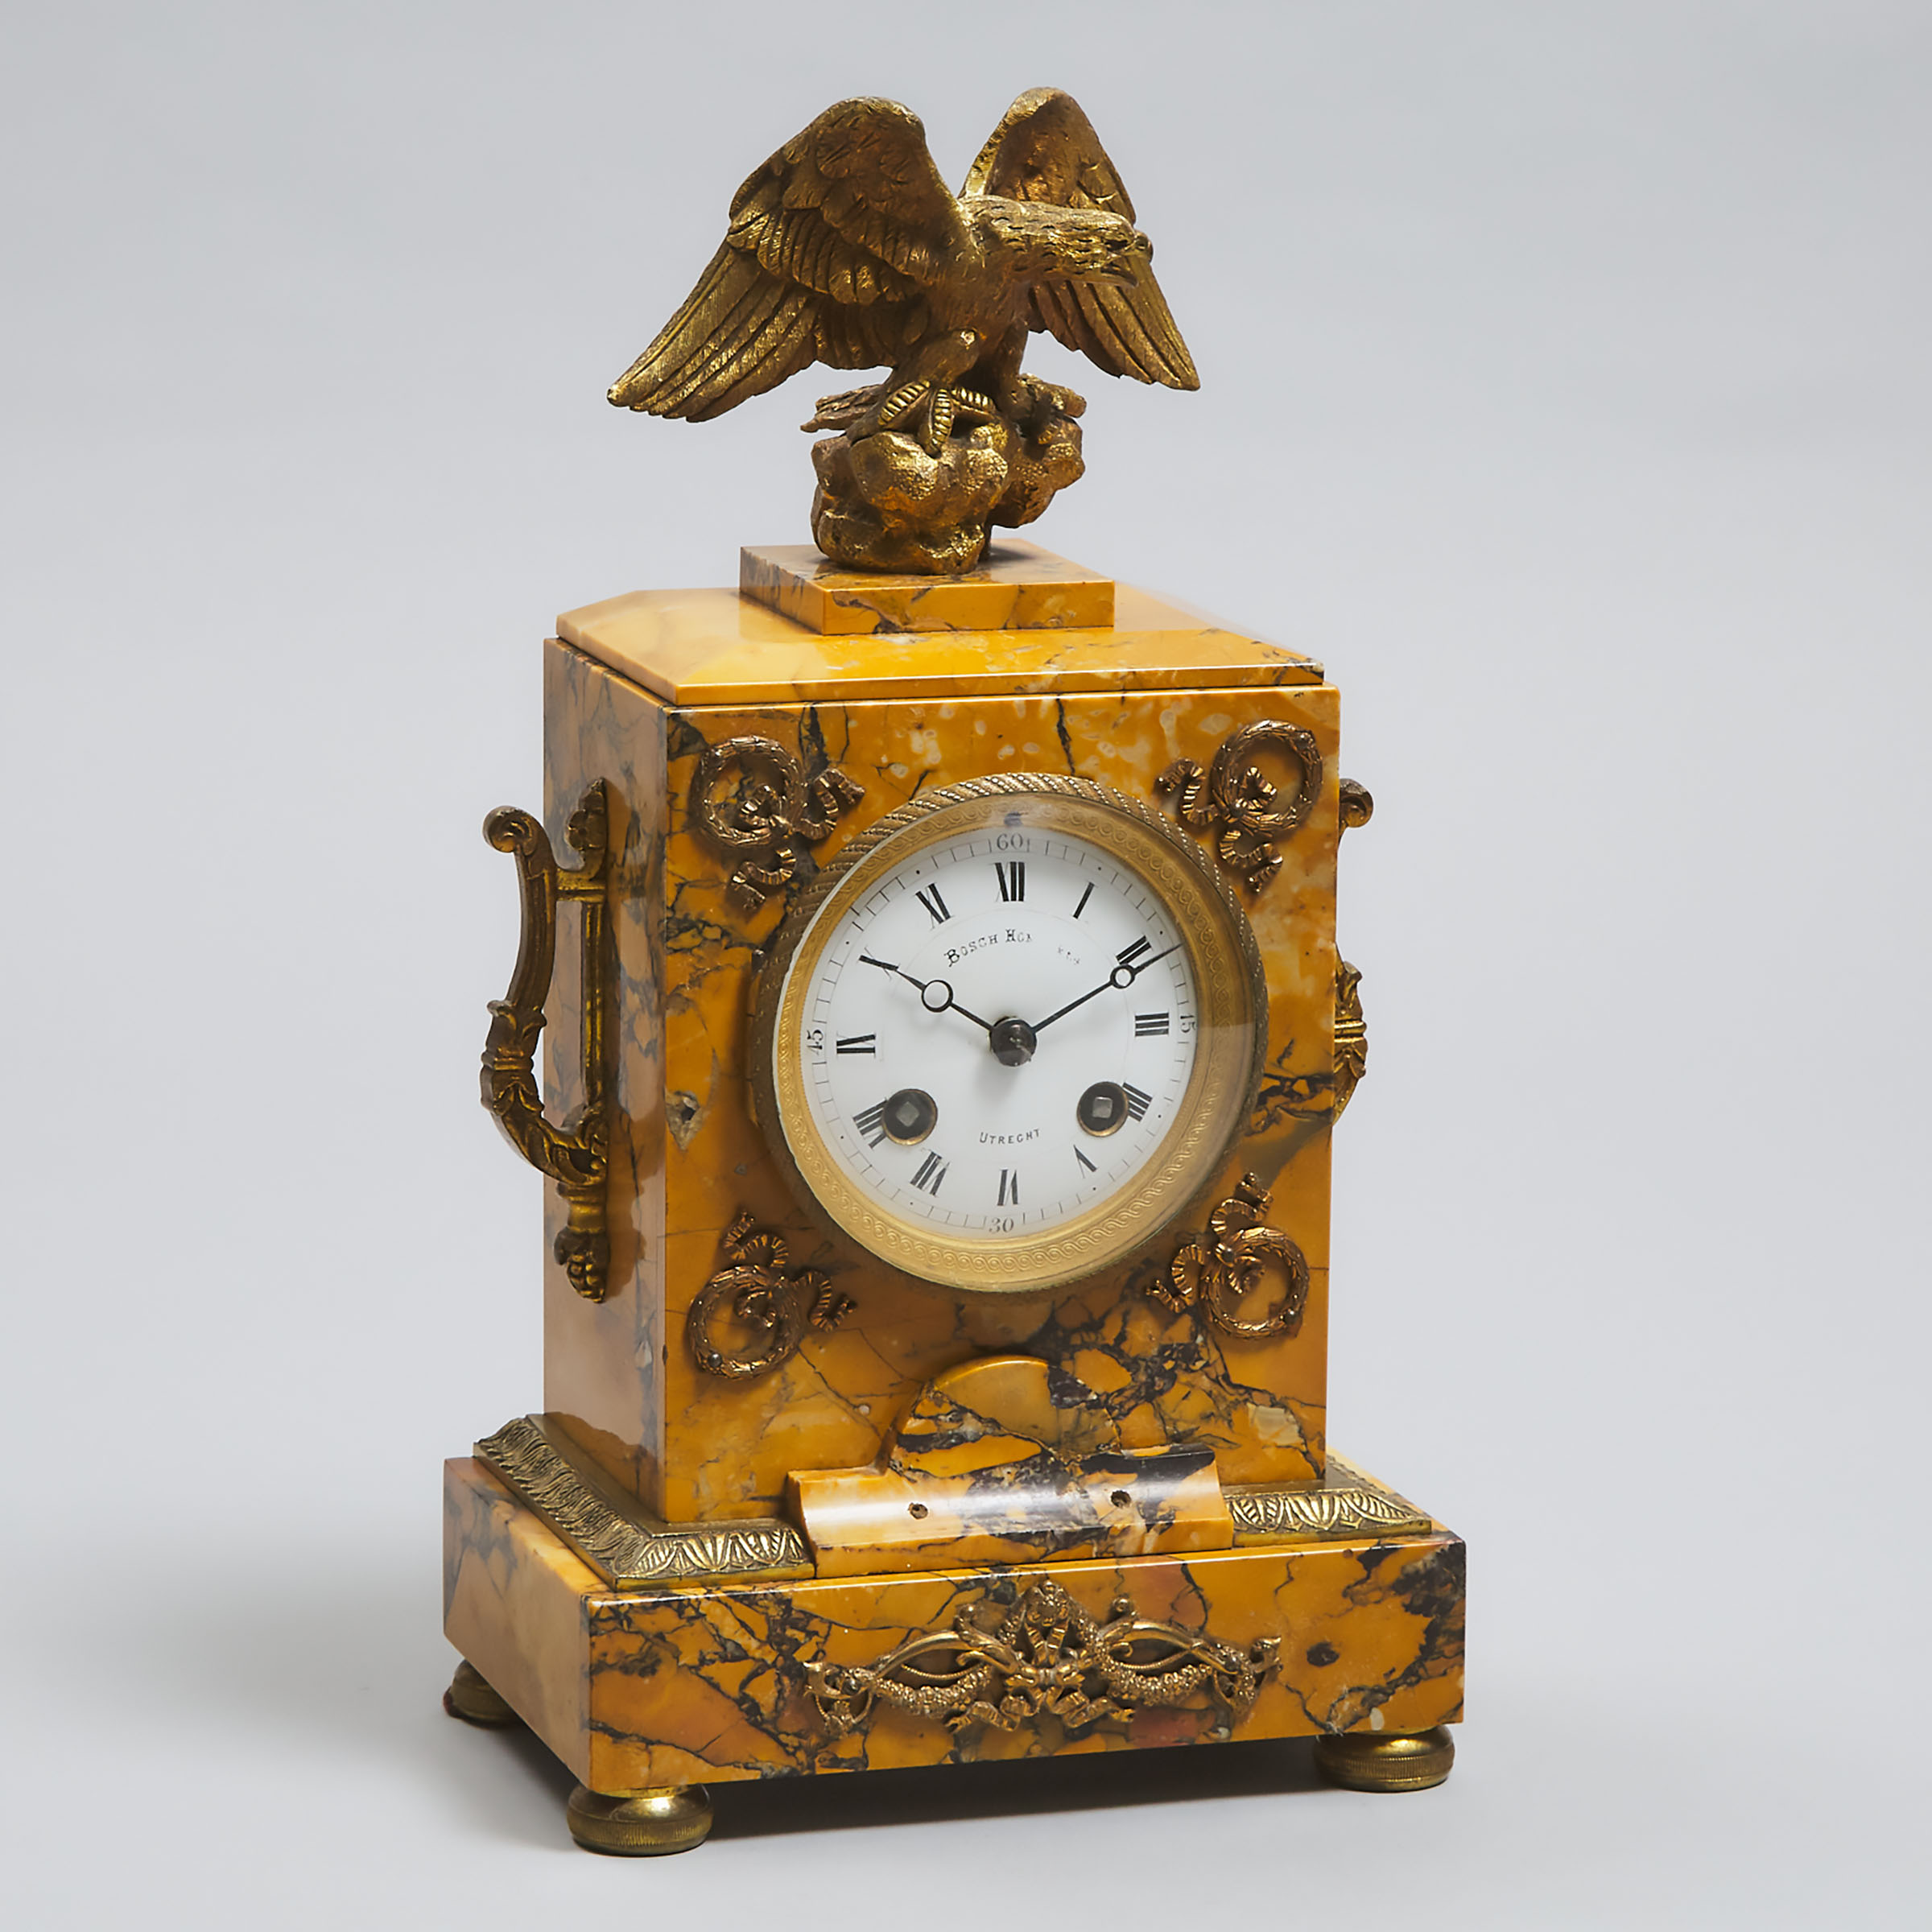 Small French Neoclassical Ormolu Mounted Sienna Marble Mantle Clock, mid 19th century